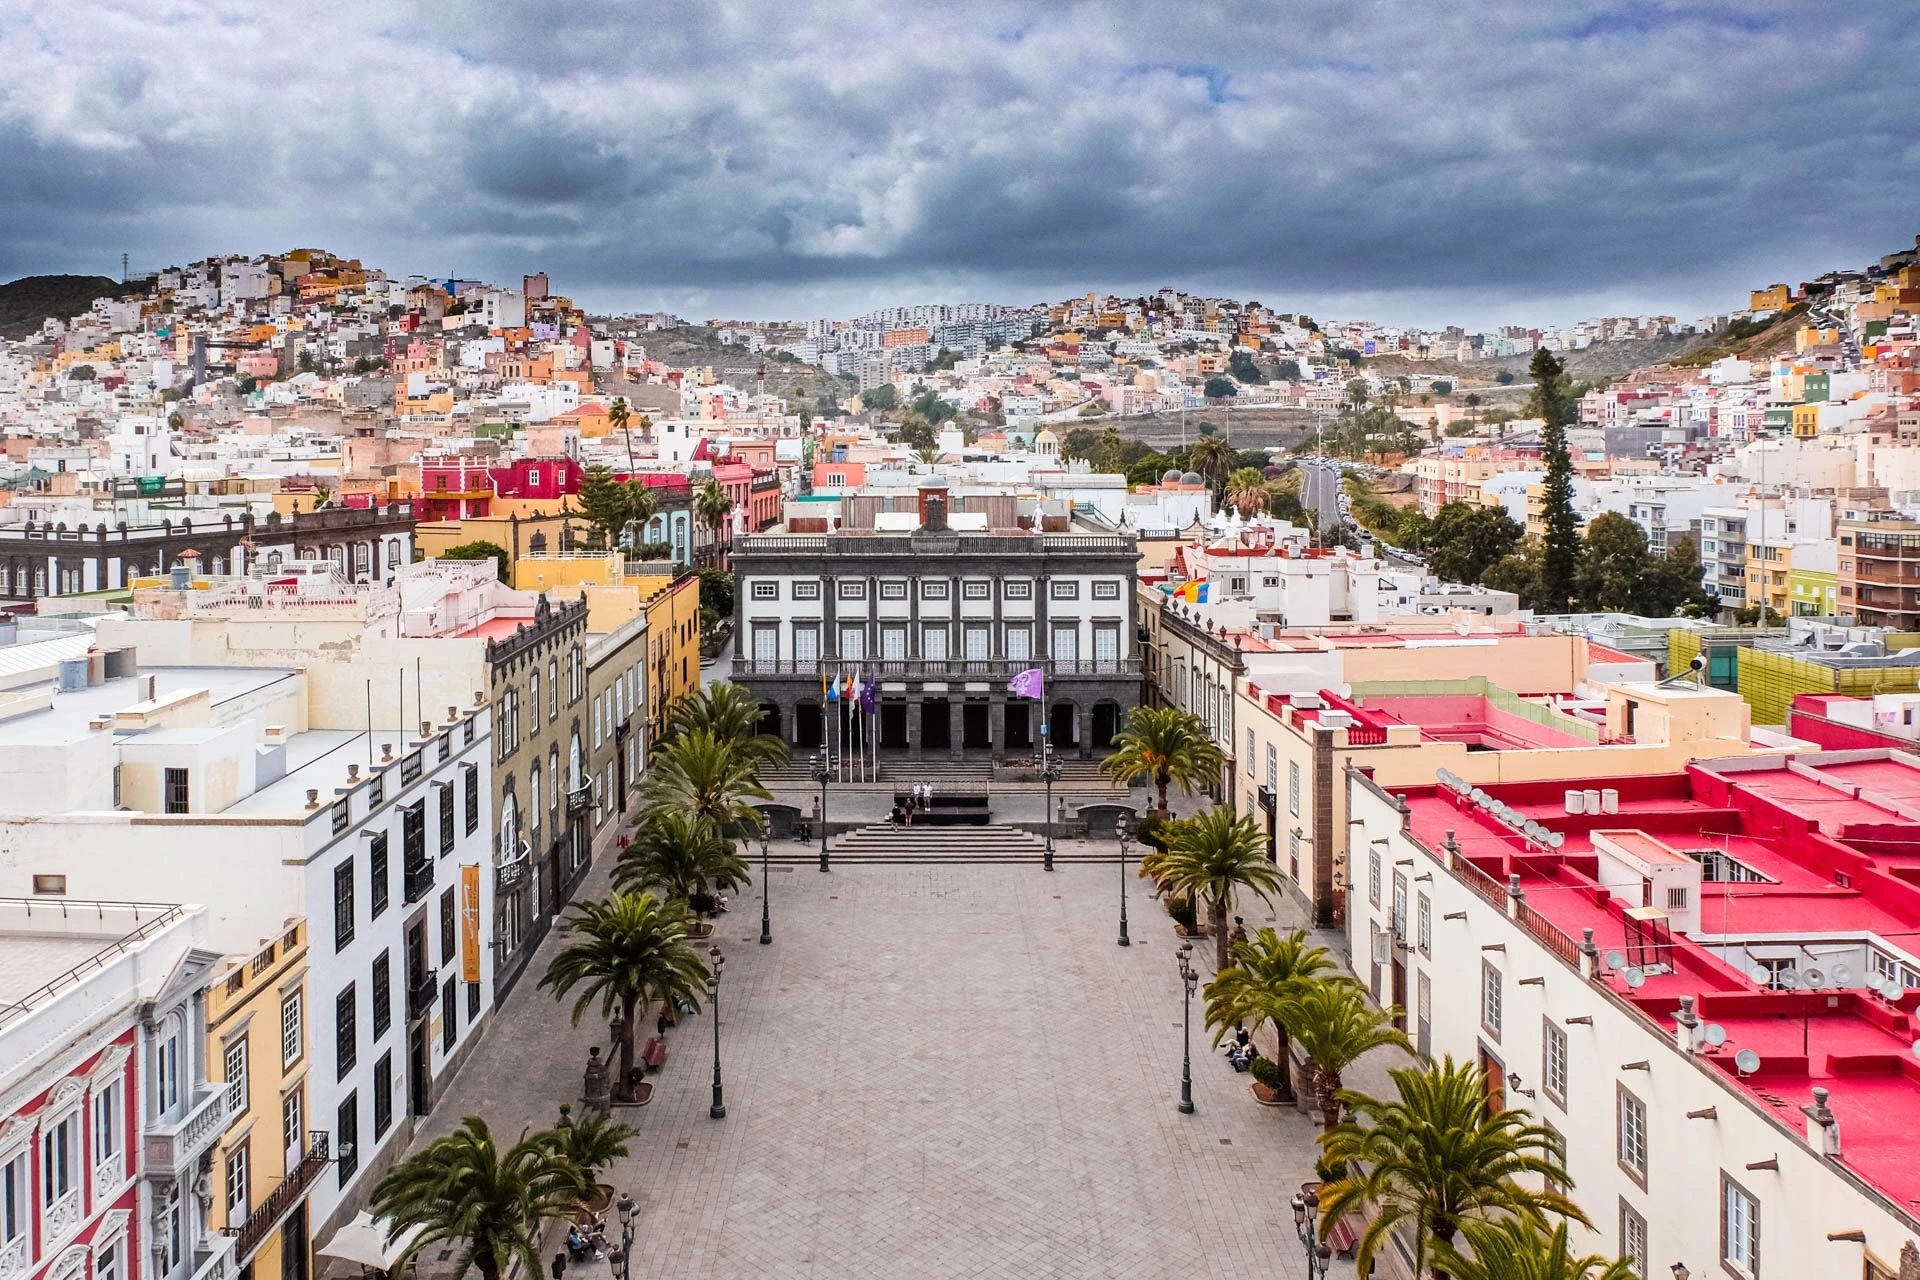 Removals to the Canary Islands: Prices and information for moves to the Canary Islands